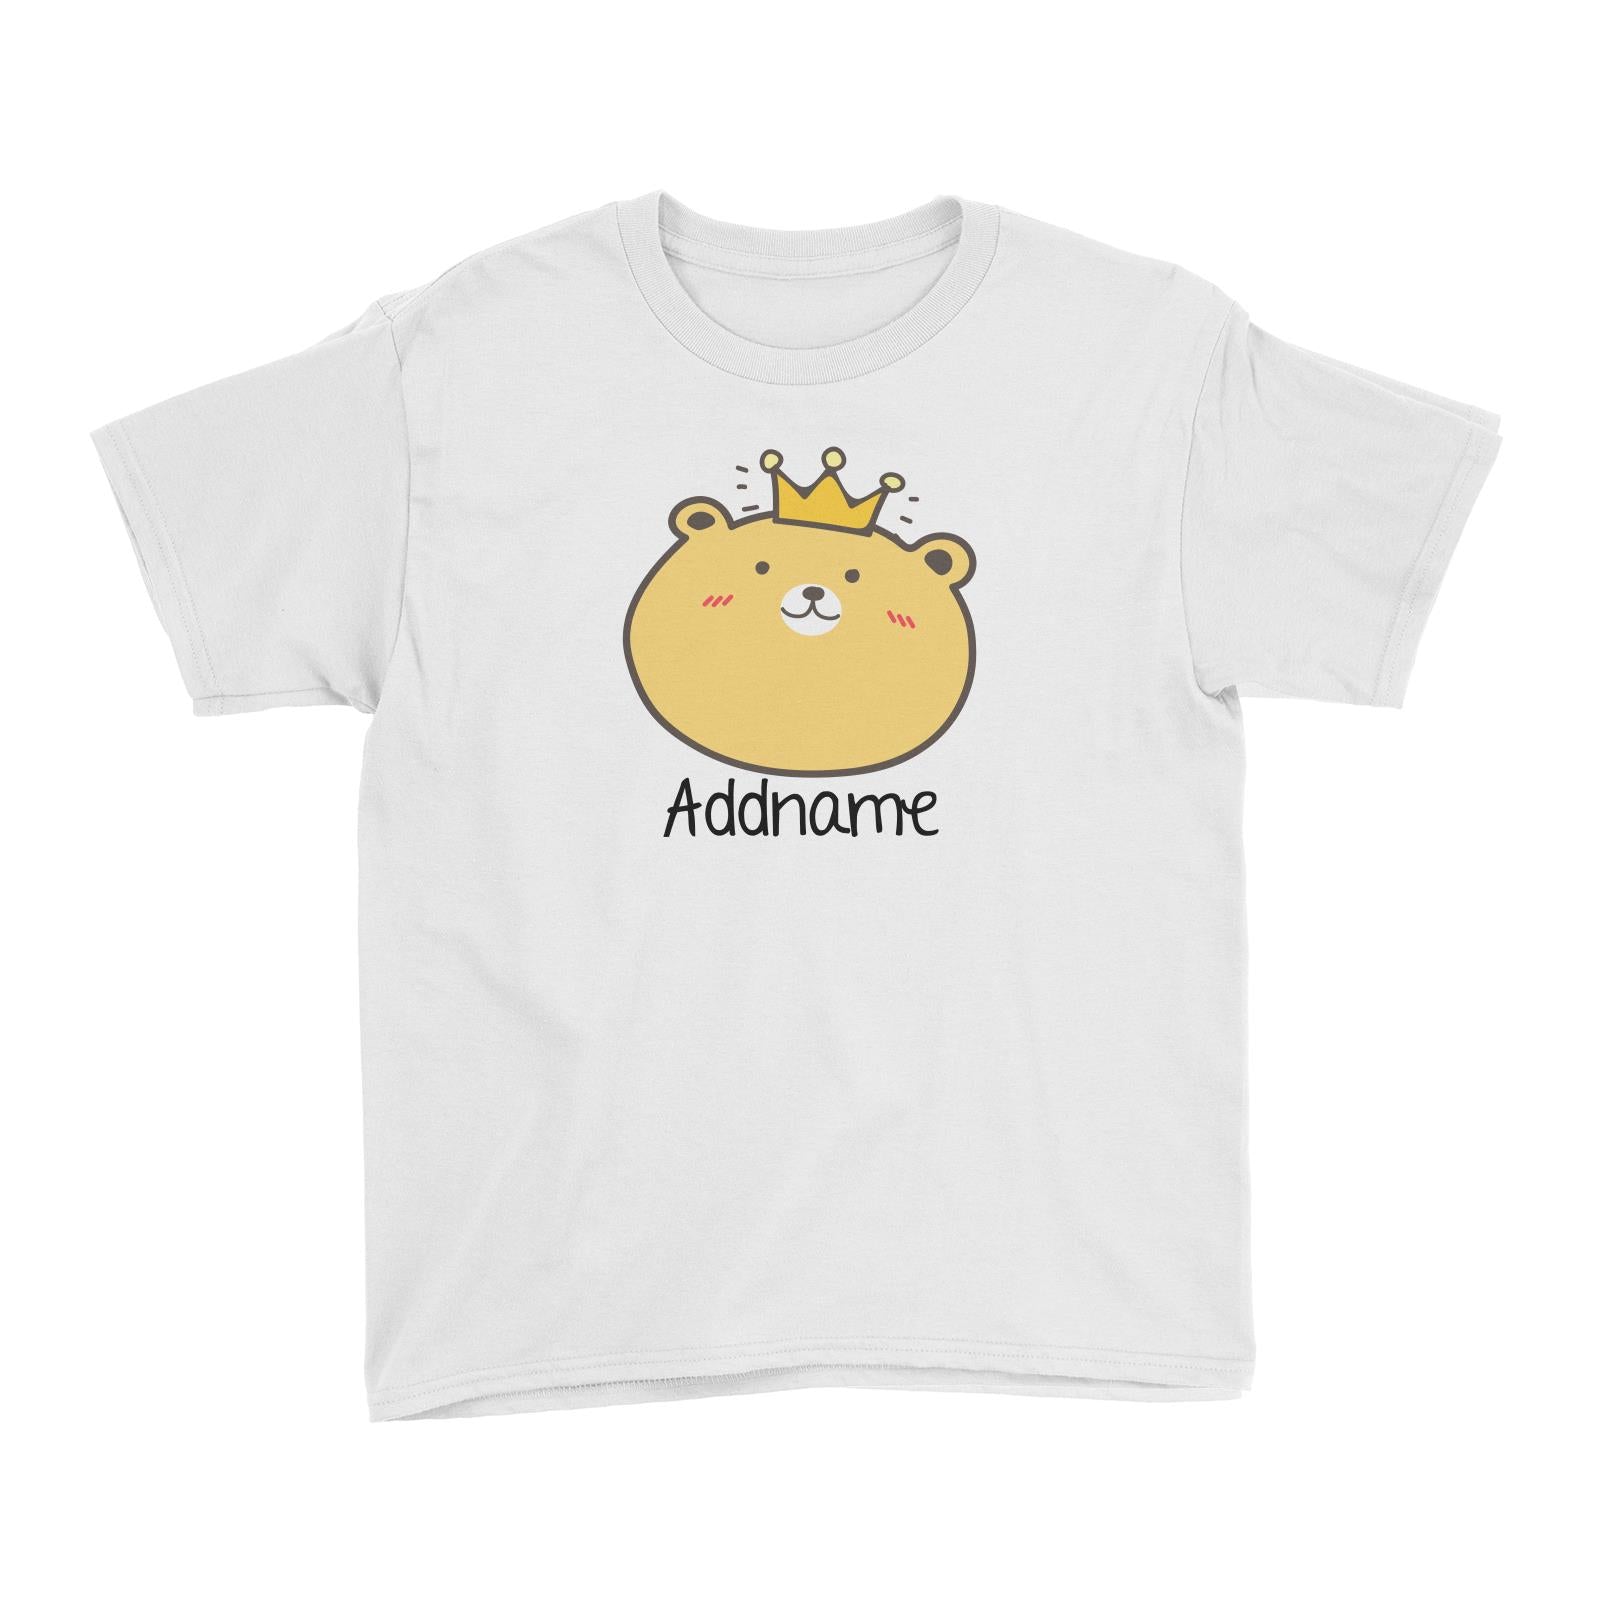 Cute Animals And Friends Series Cute Yellow Bear With Crown Addname Kid's T-Shirt